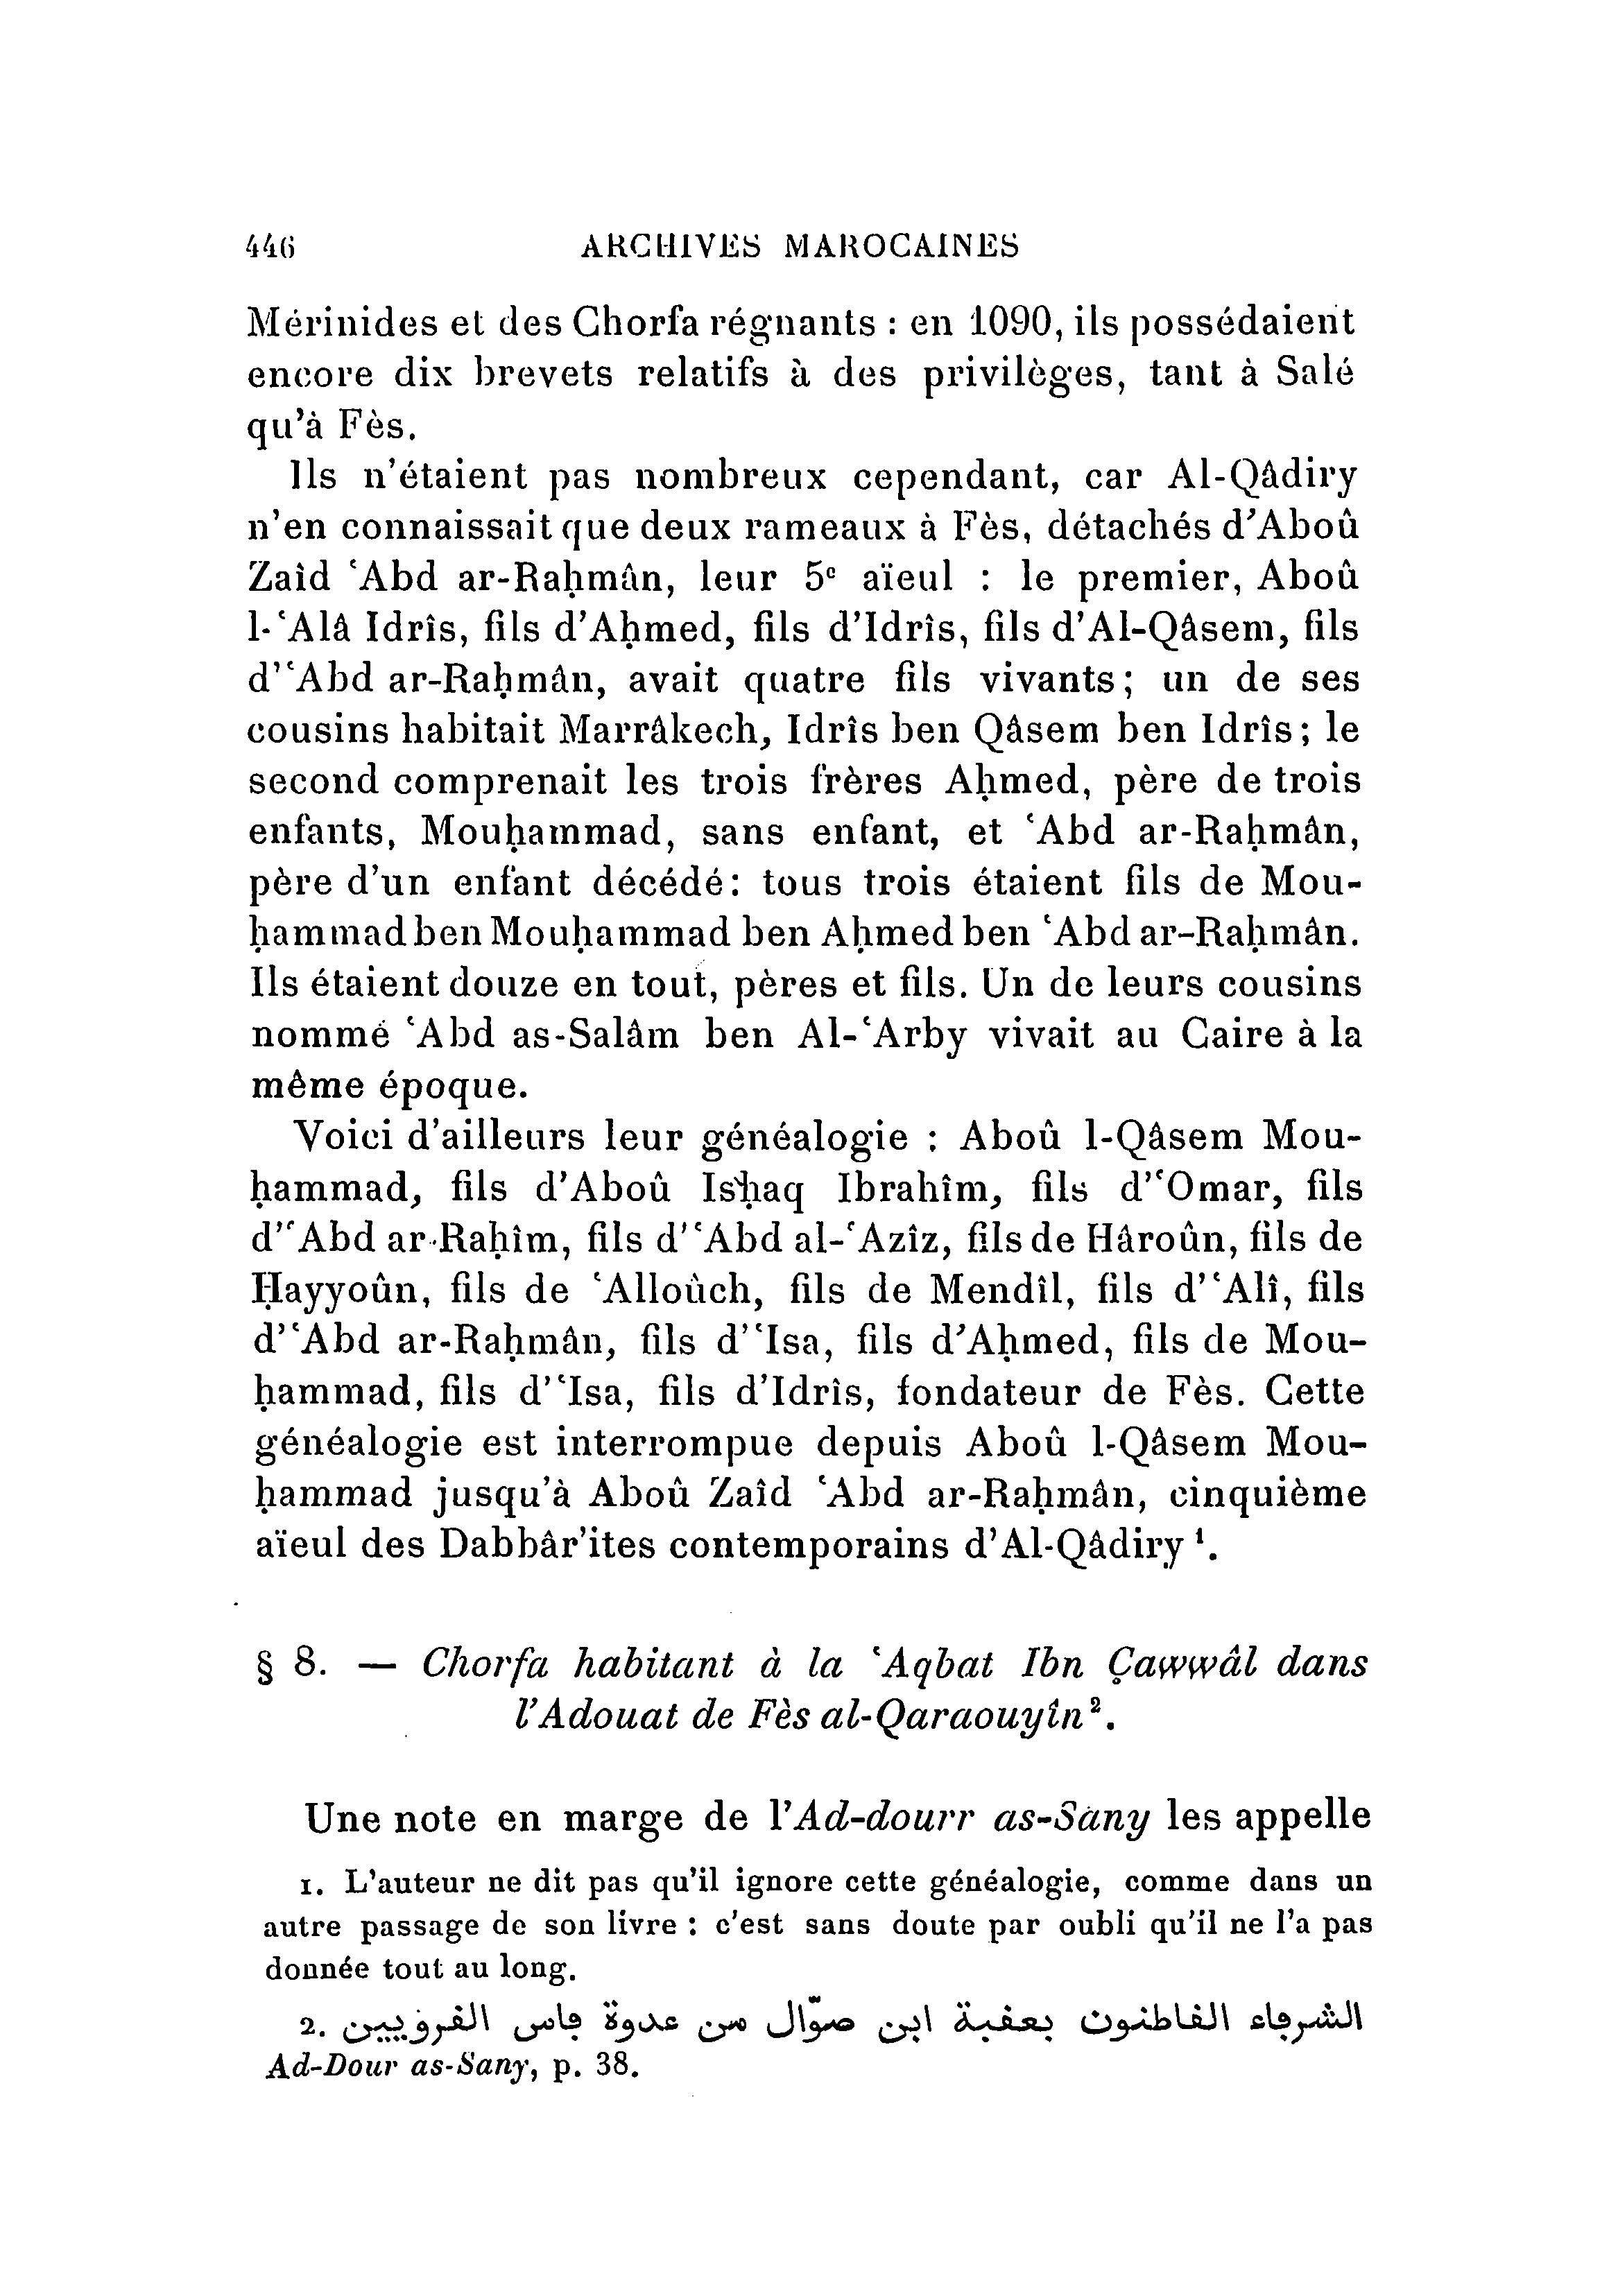 archives_marocaines-vol-1_page_458